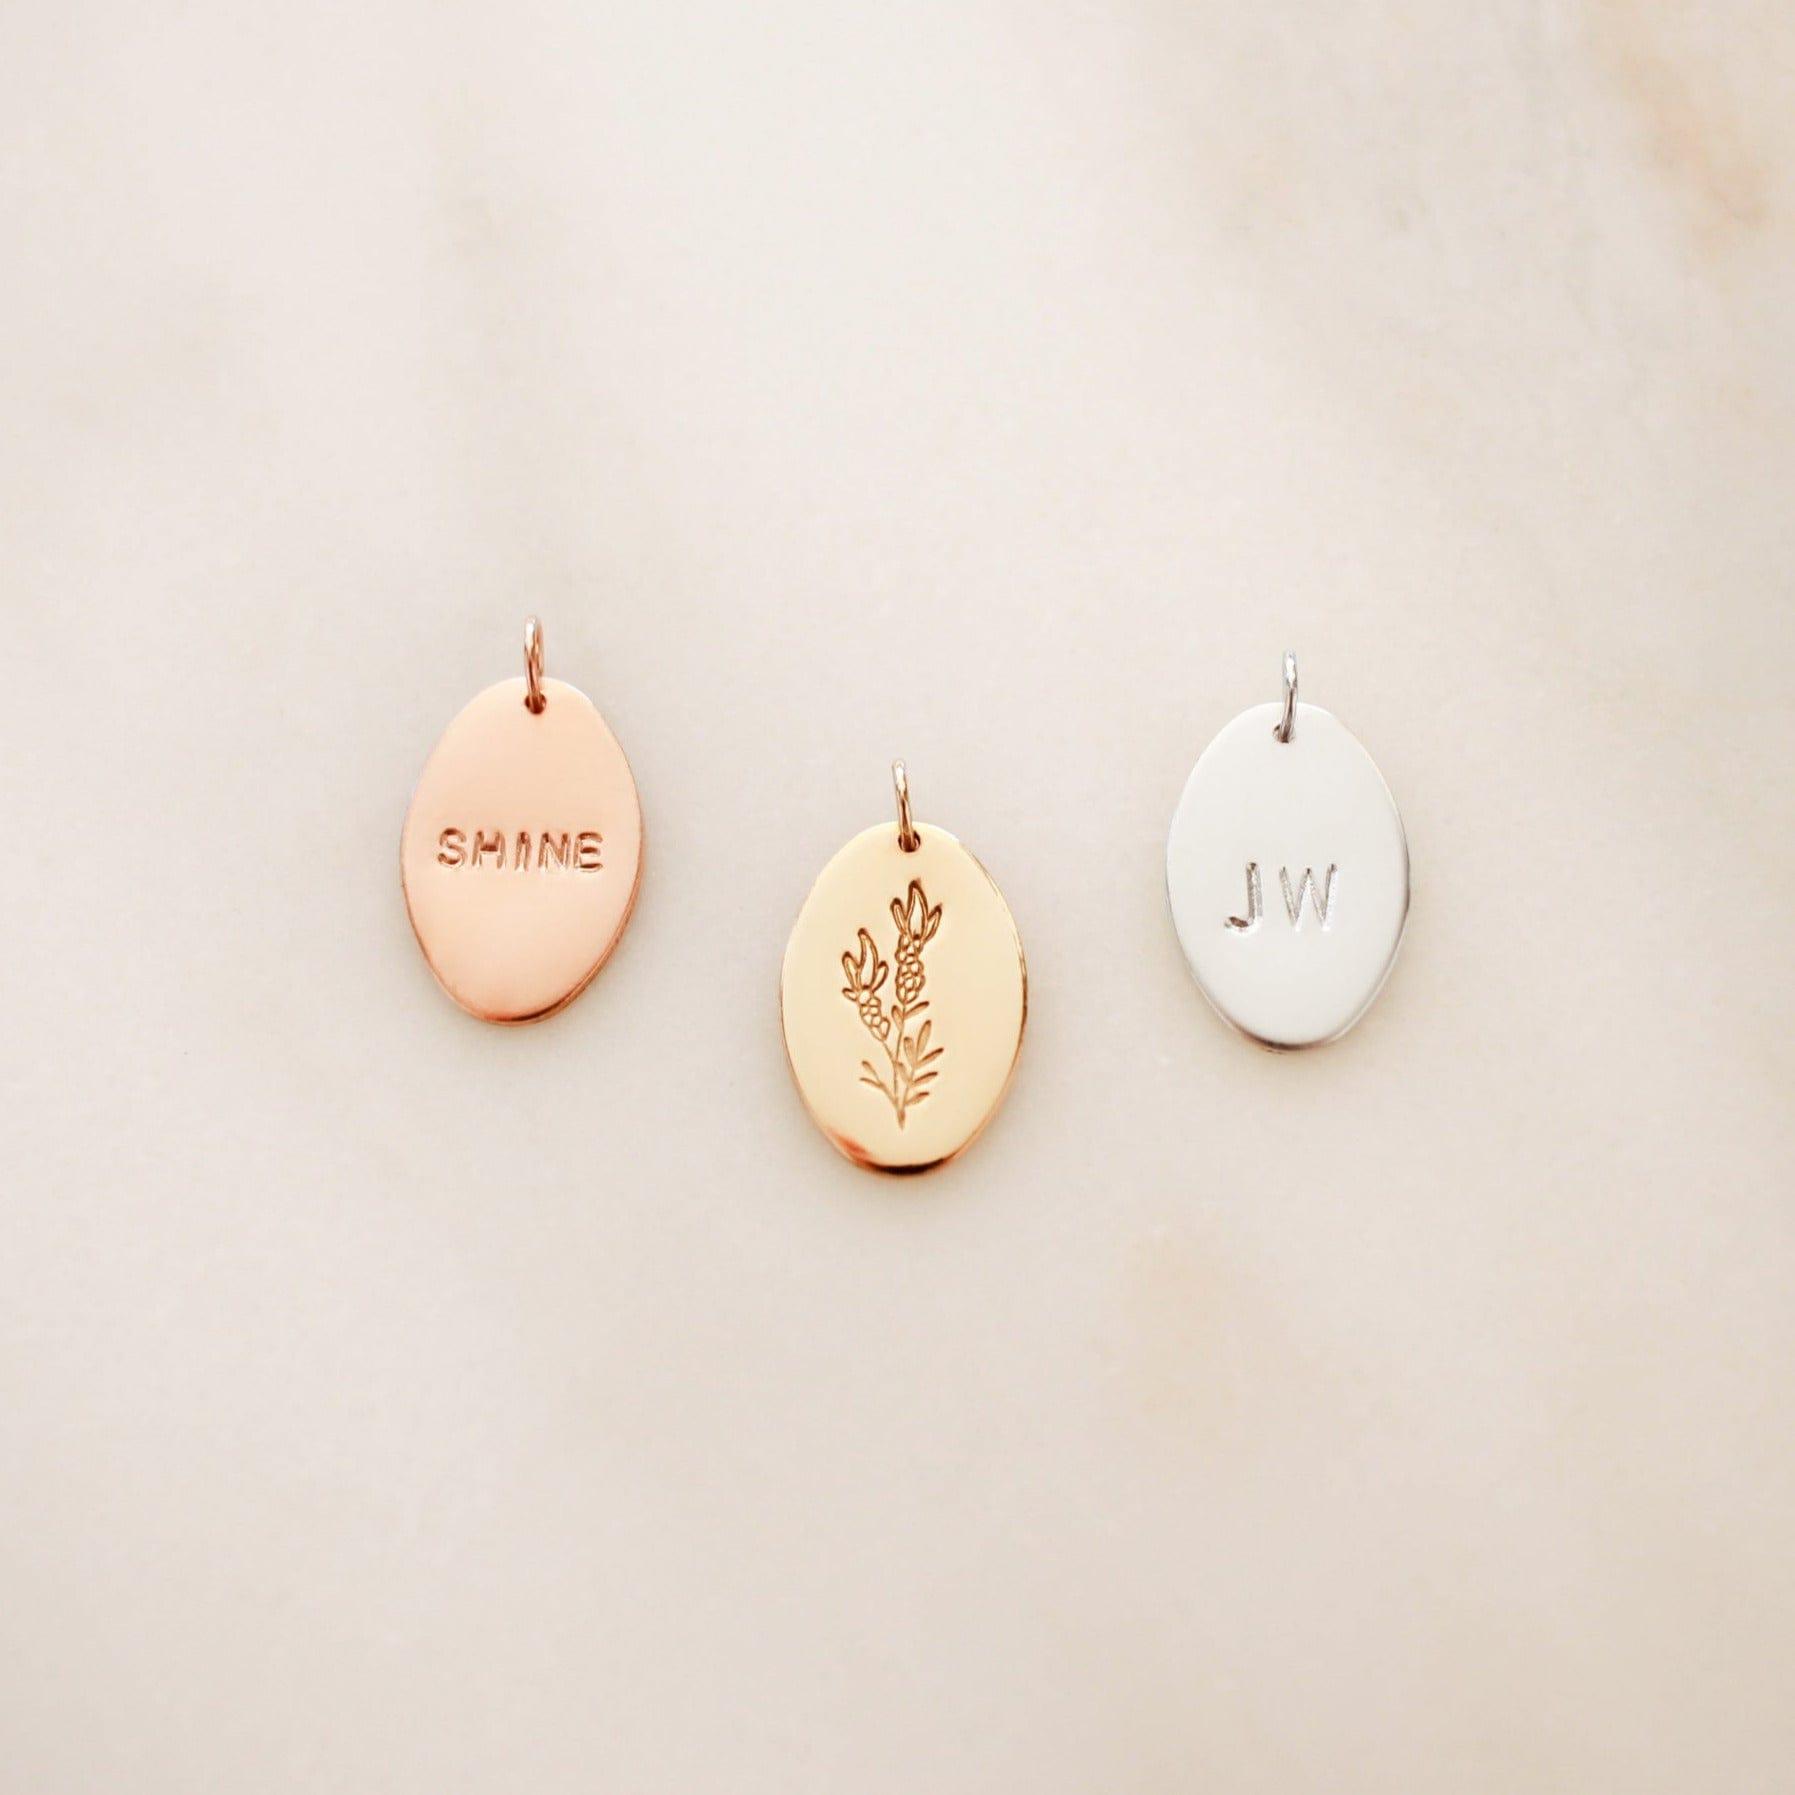 Liv Oval Charm • Add On - Nolia Jewelry - Meaningful + Sustainably Handcrafted Jewelry